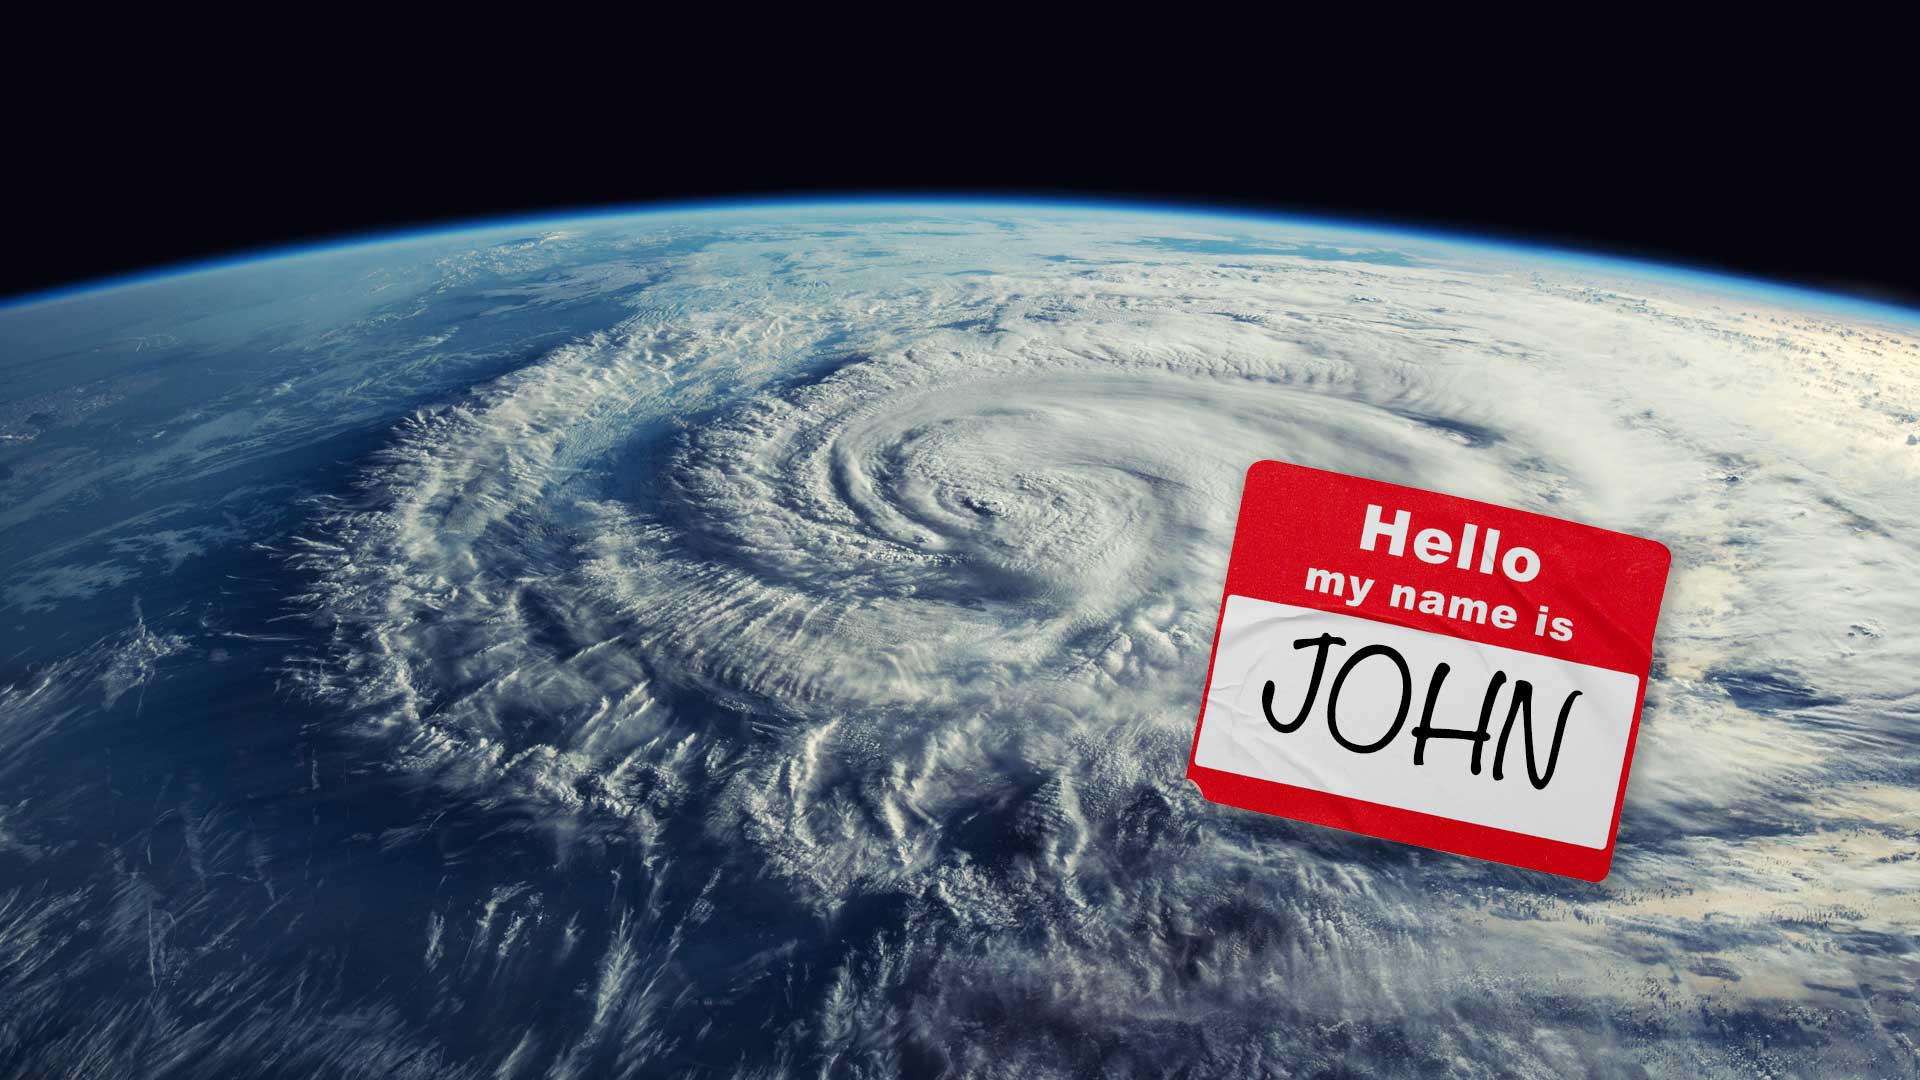 A typhoon with a name sticker reading John